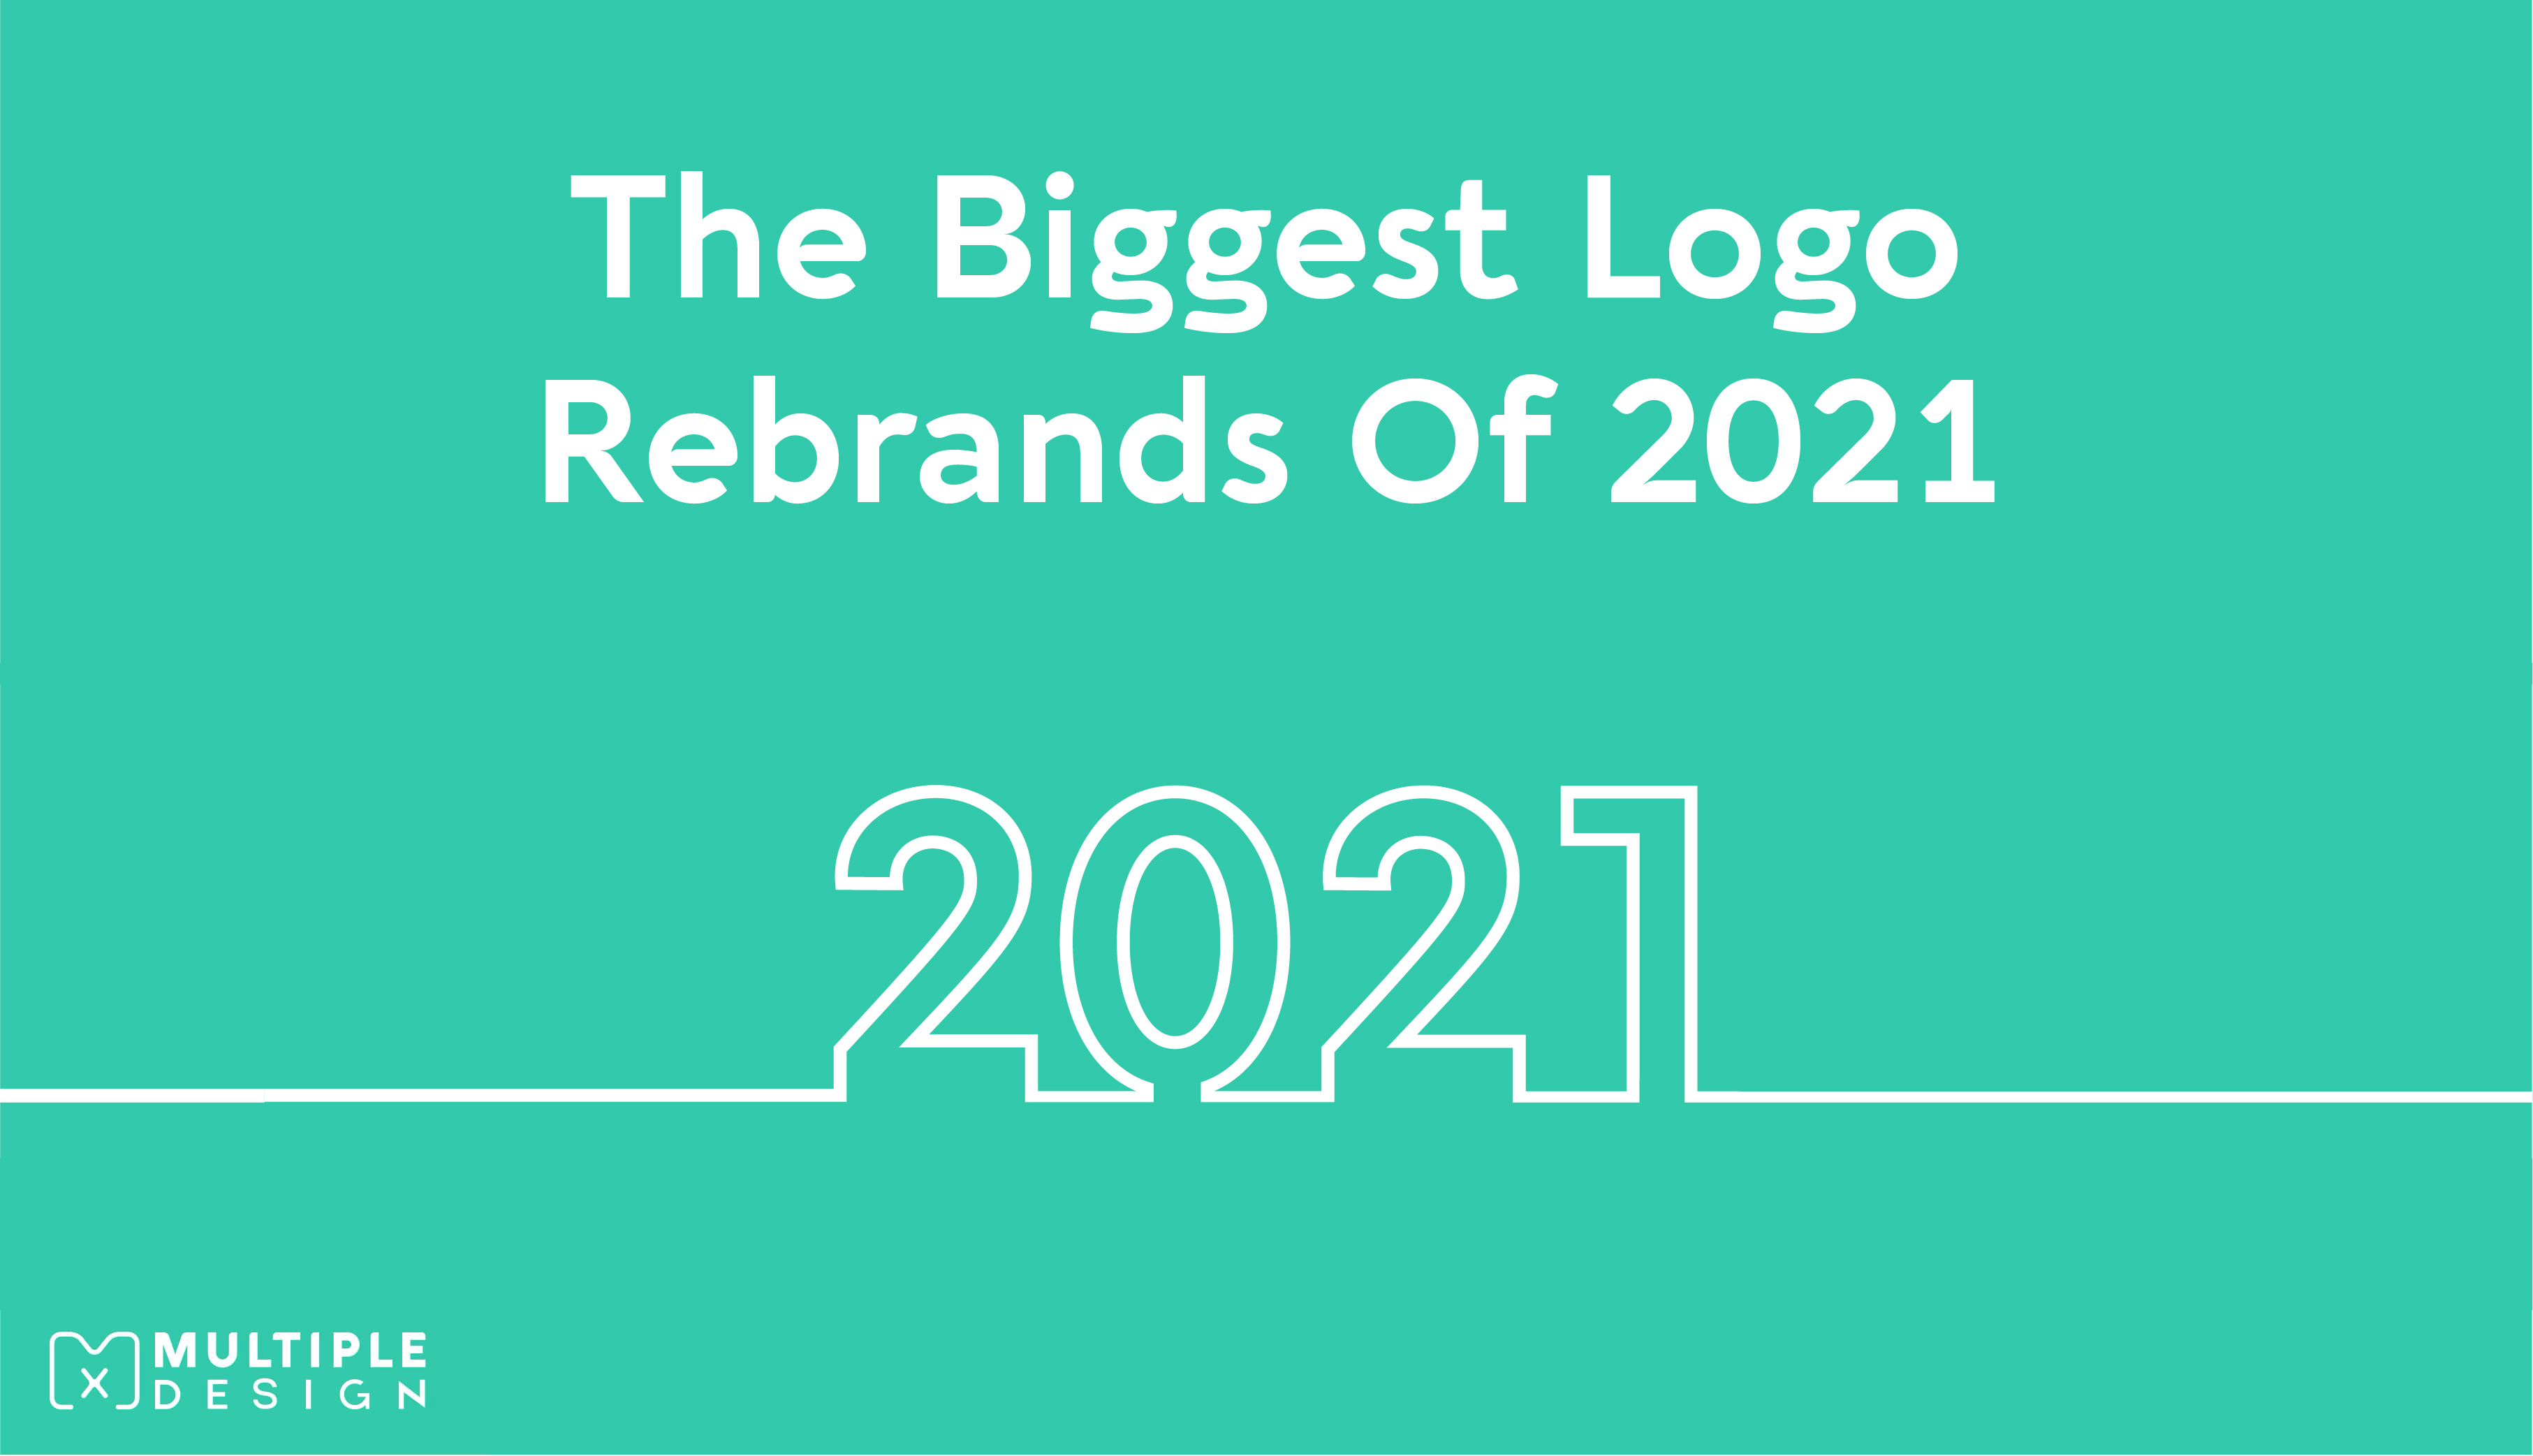 The Biggest Logo Rebrands Of 2021: Updated Weekly